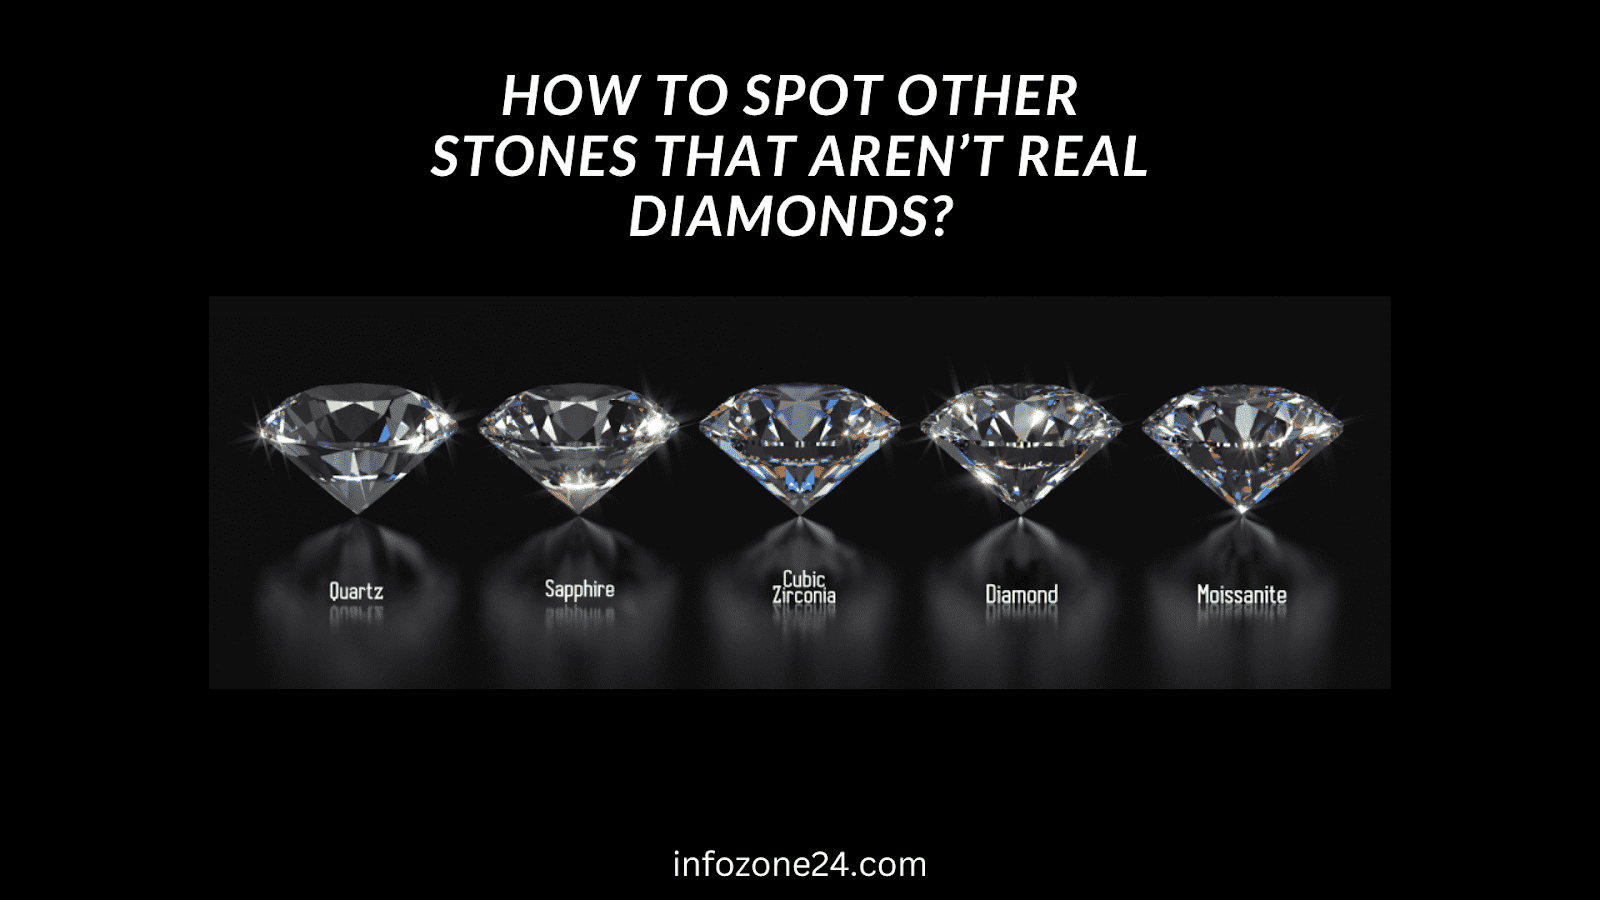 How To Spot Other Stones That Aren’t Real Diamonds